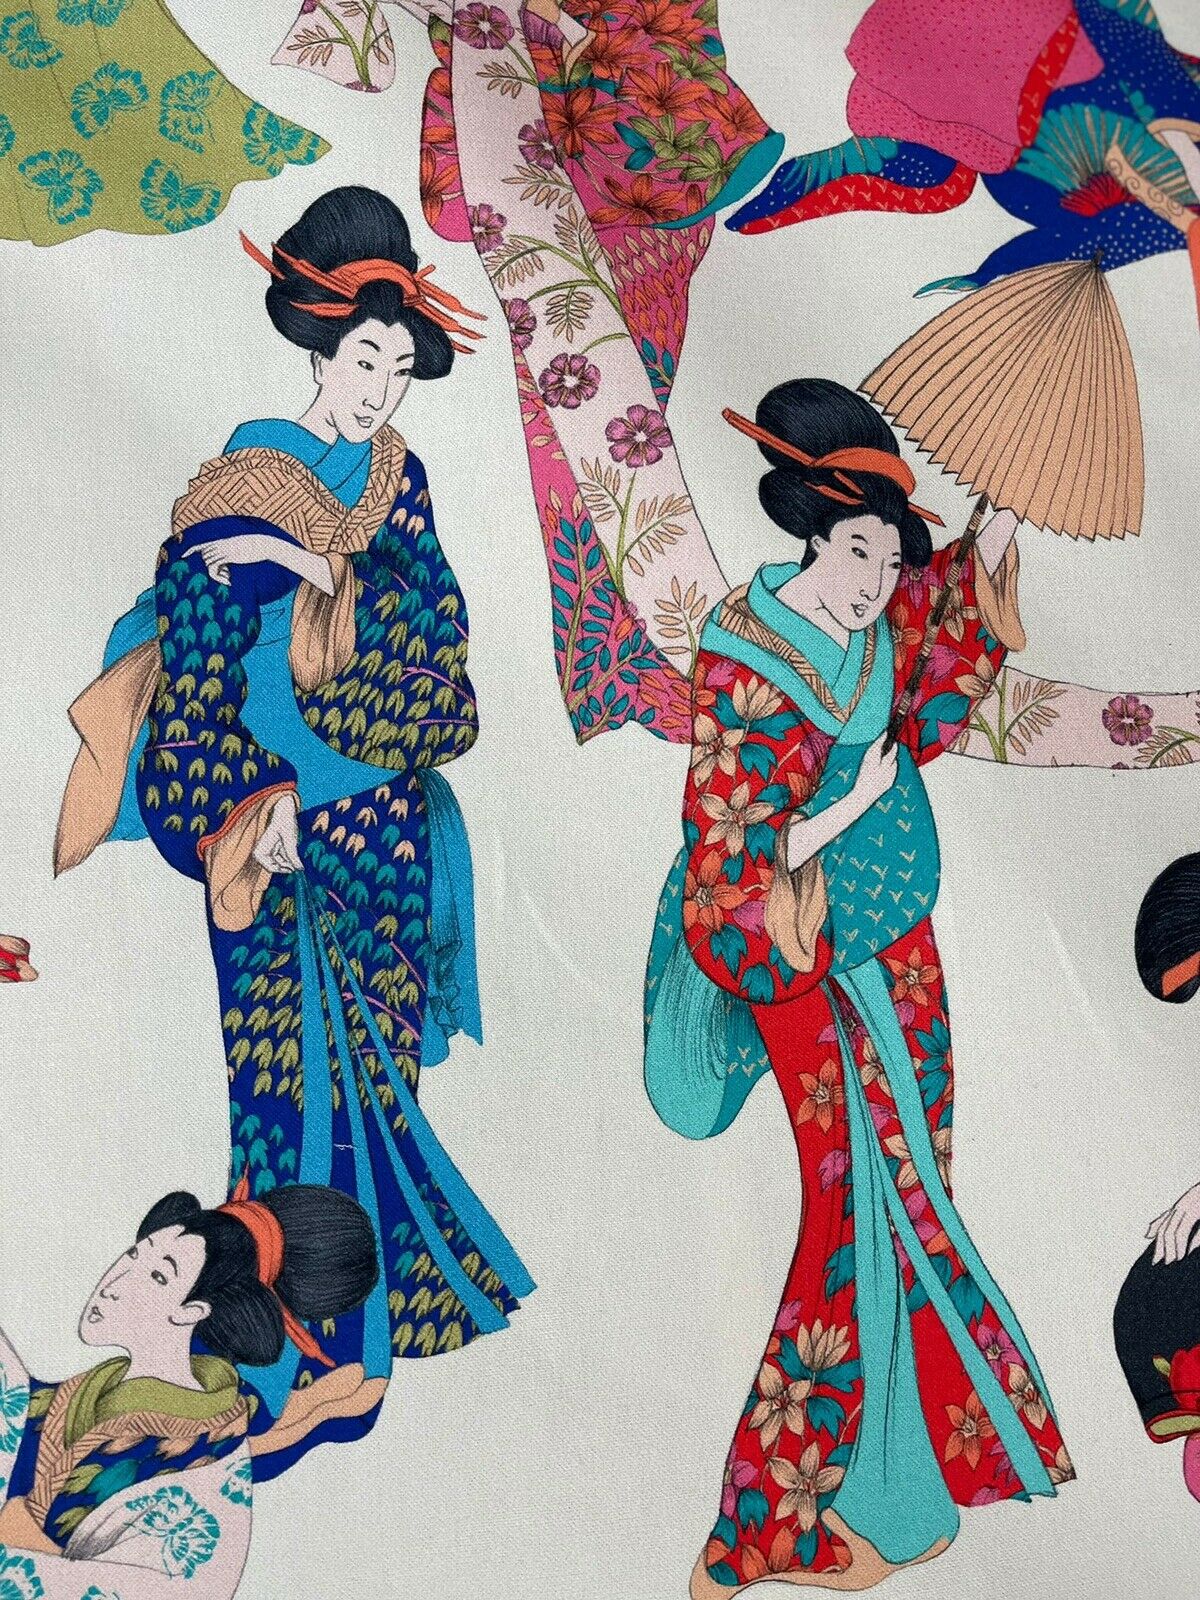 Geisha Printed Cotton Fabric by Meter Japanese Lady Kimono Motif Sewing Material Blue Pink Red Floral Textile